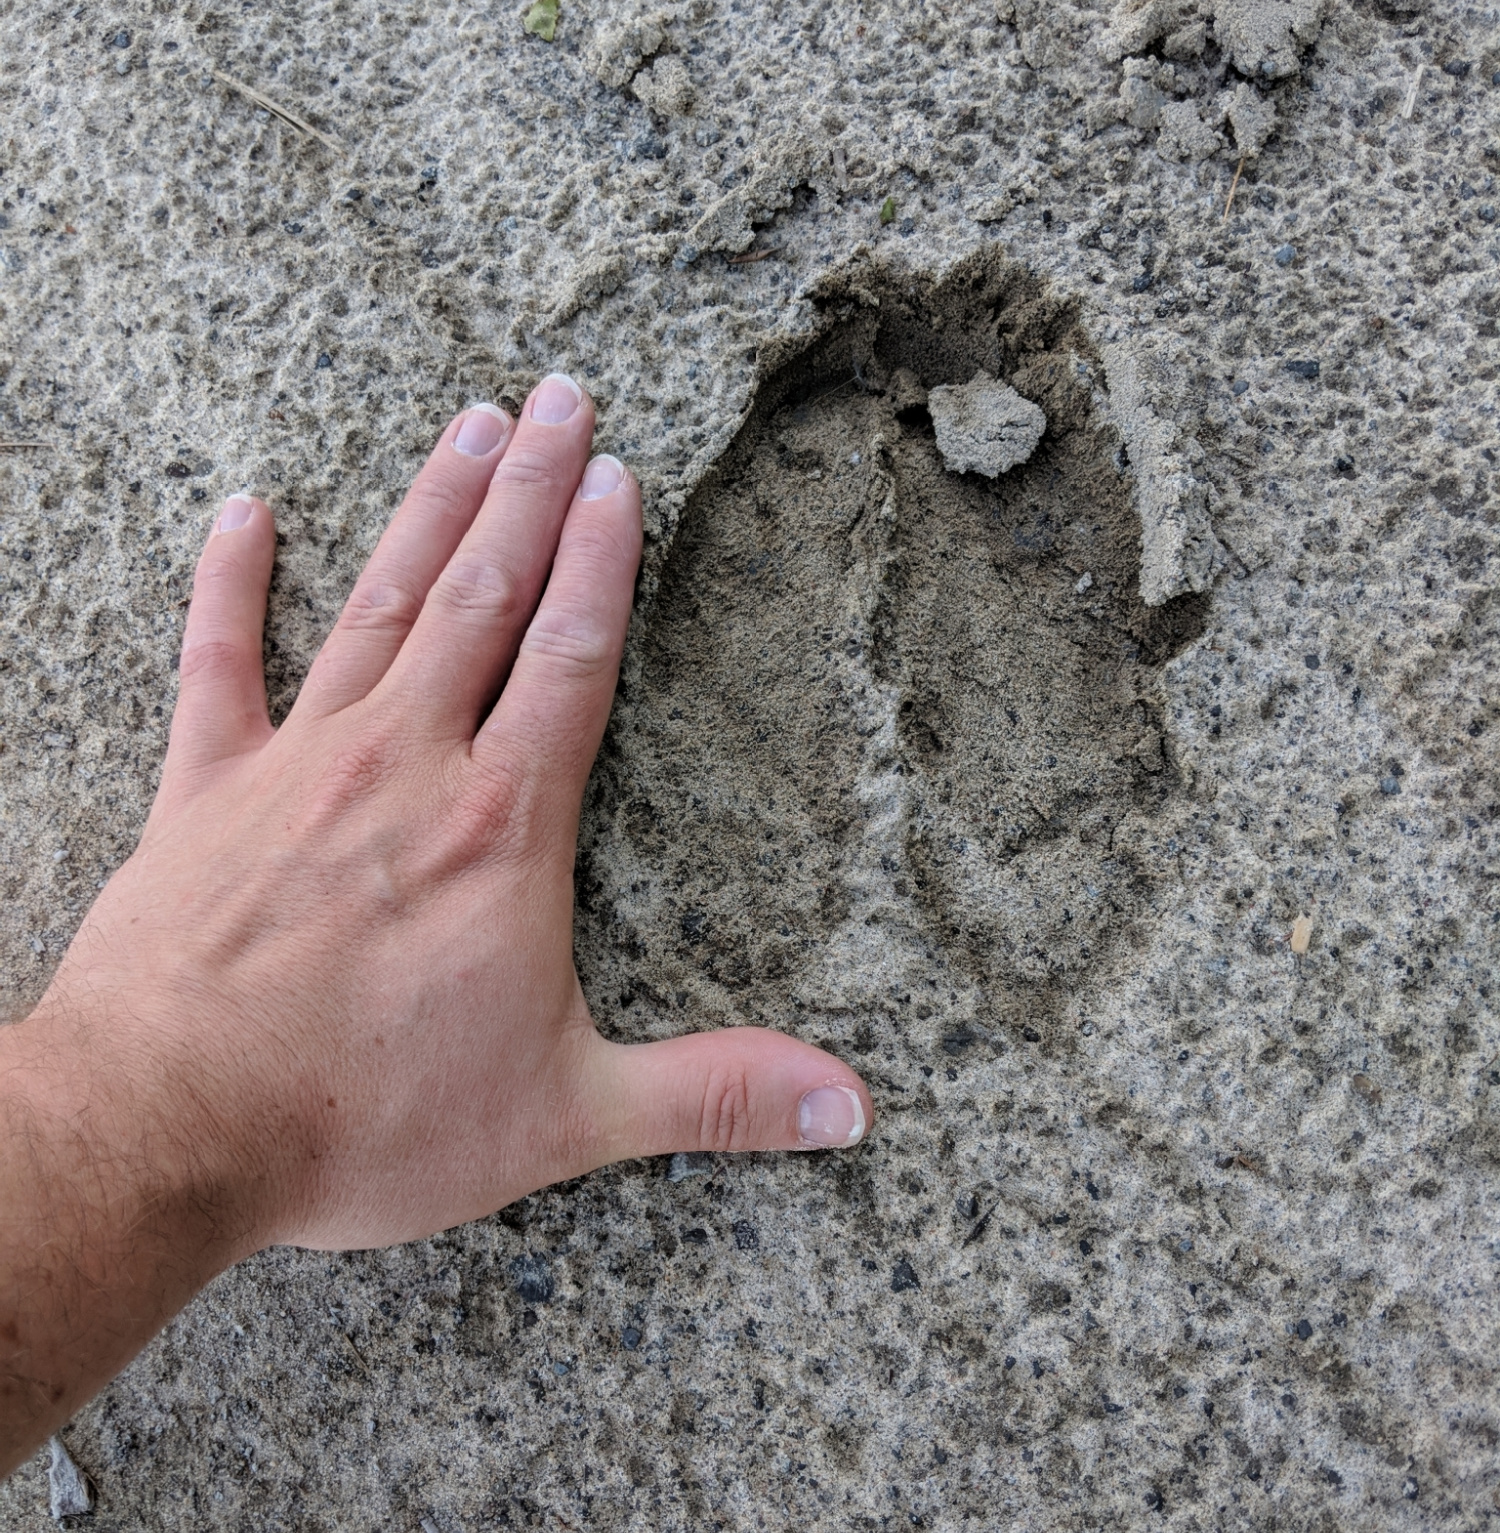 A man puts his hand next to a moose track in sand.